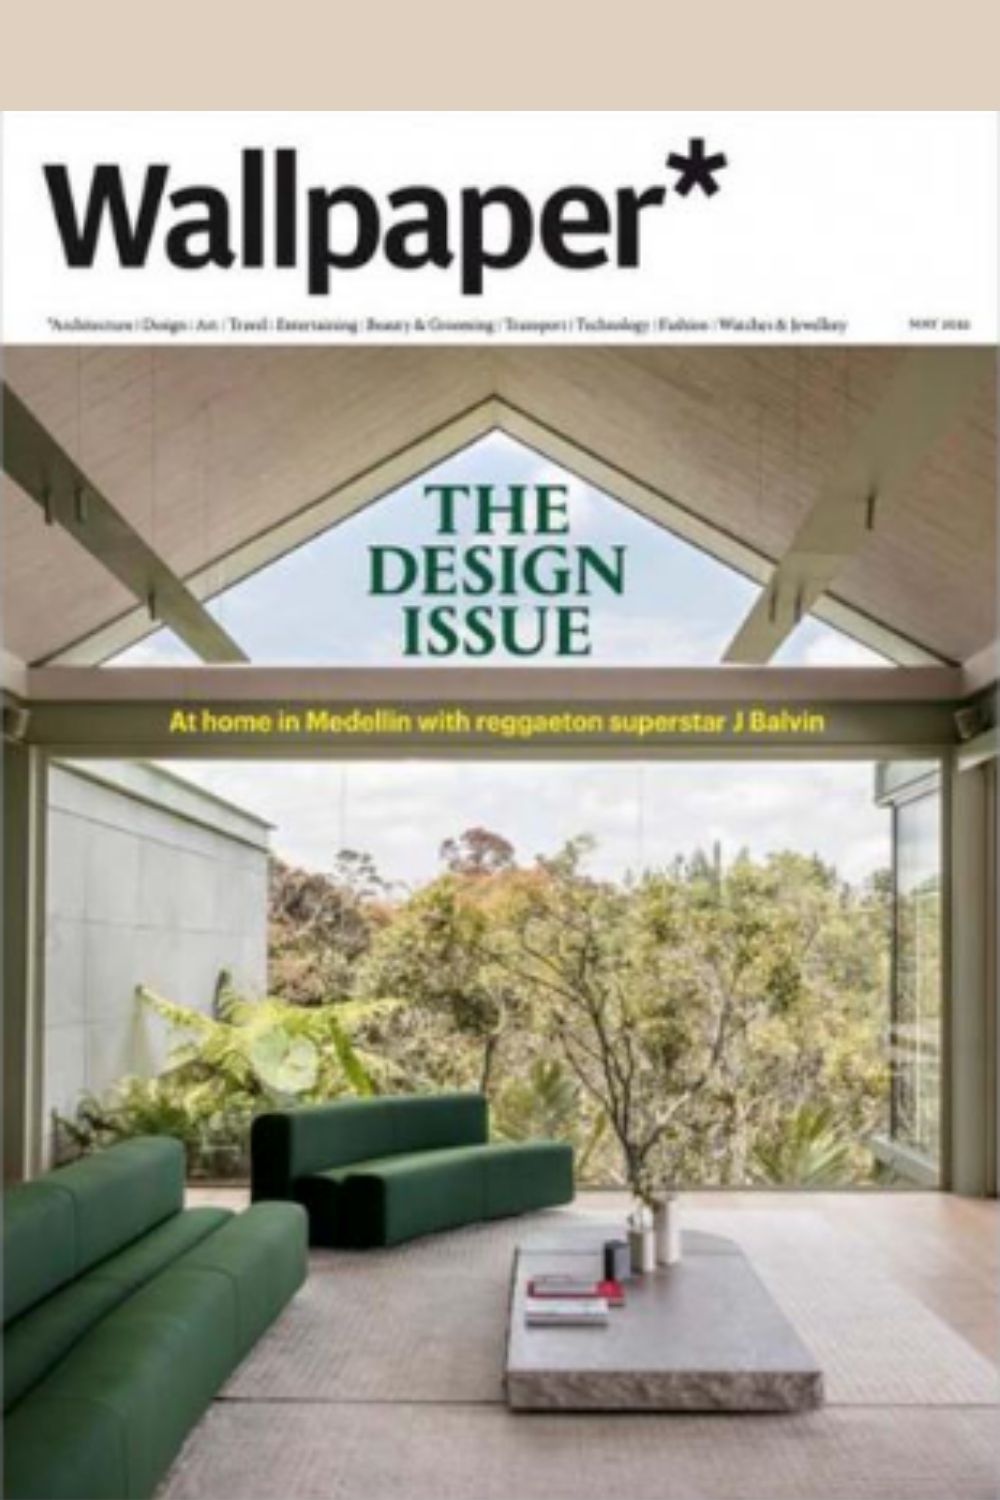 Wallpaper* Magazine May 2022 The Design Issue